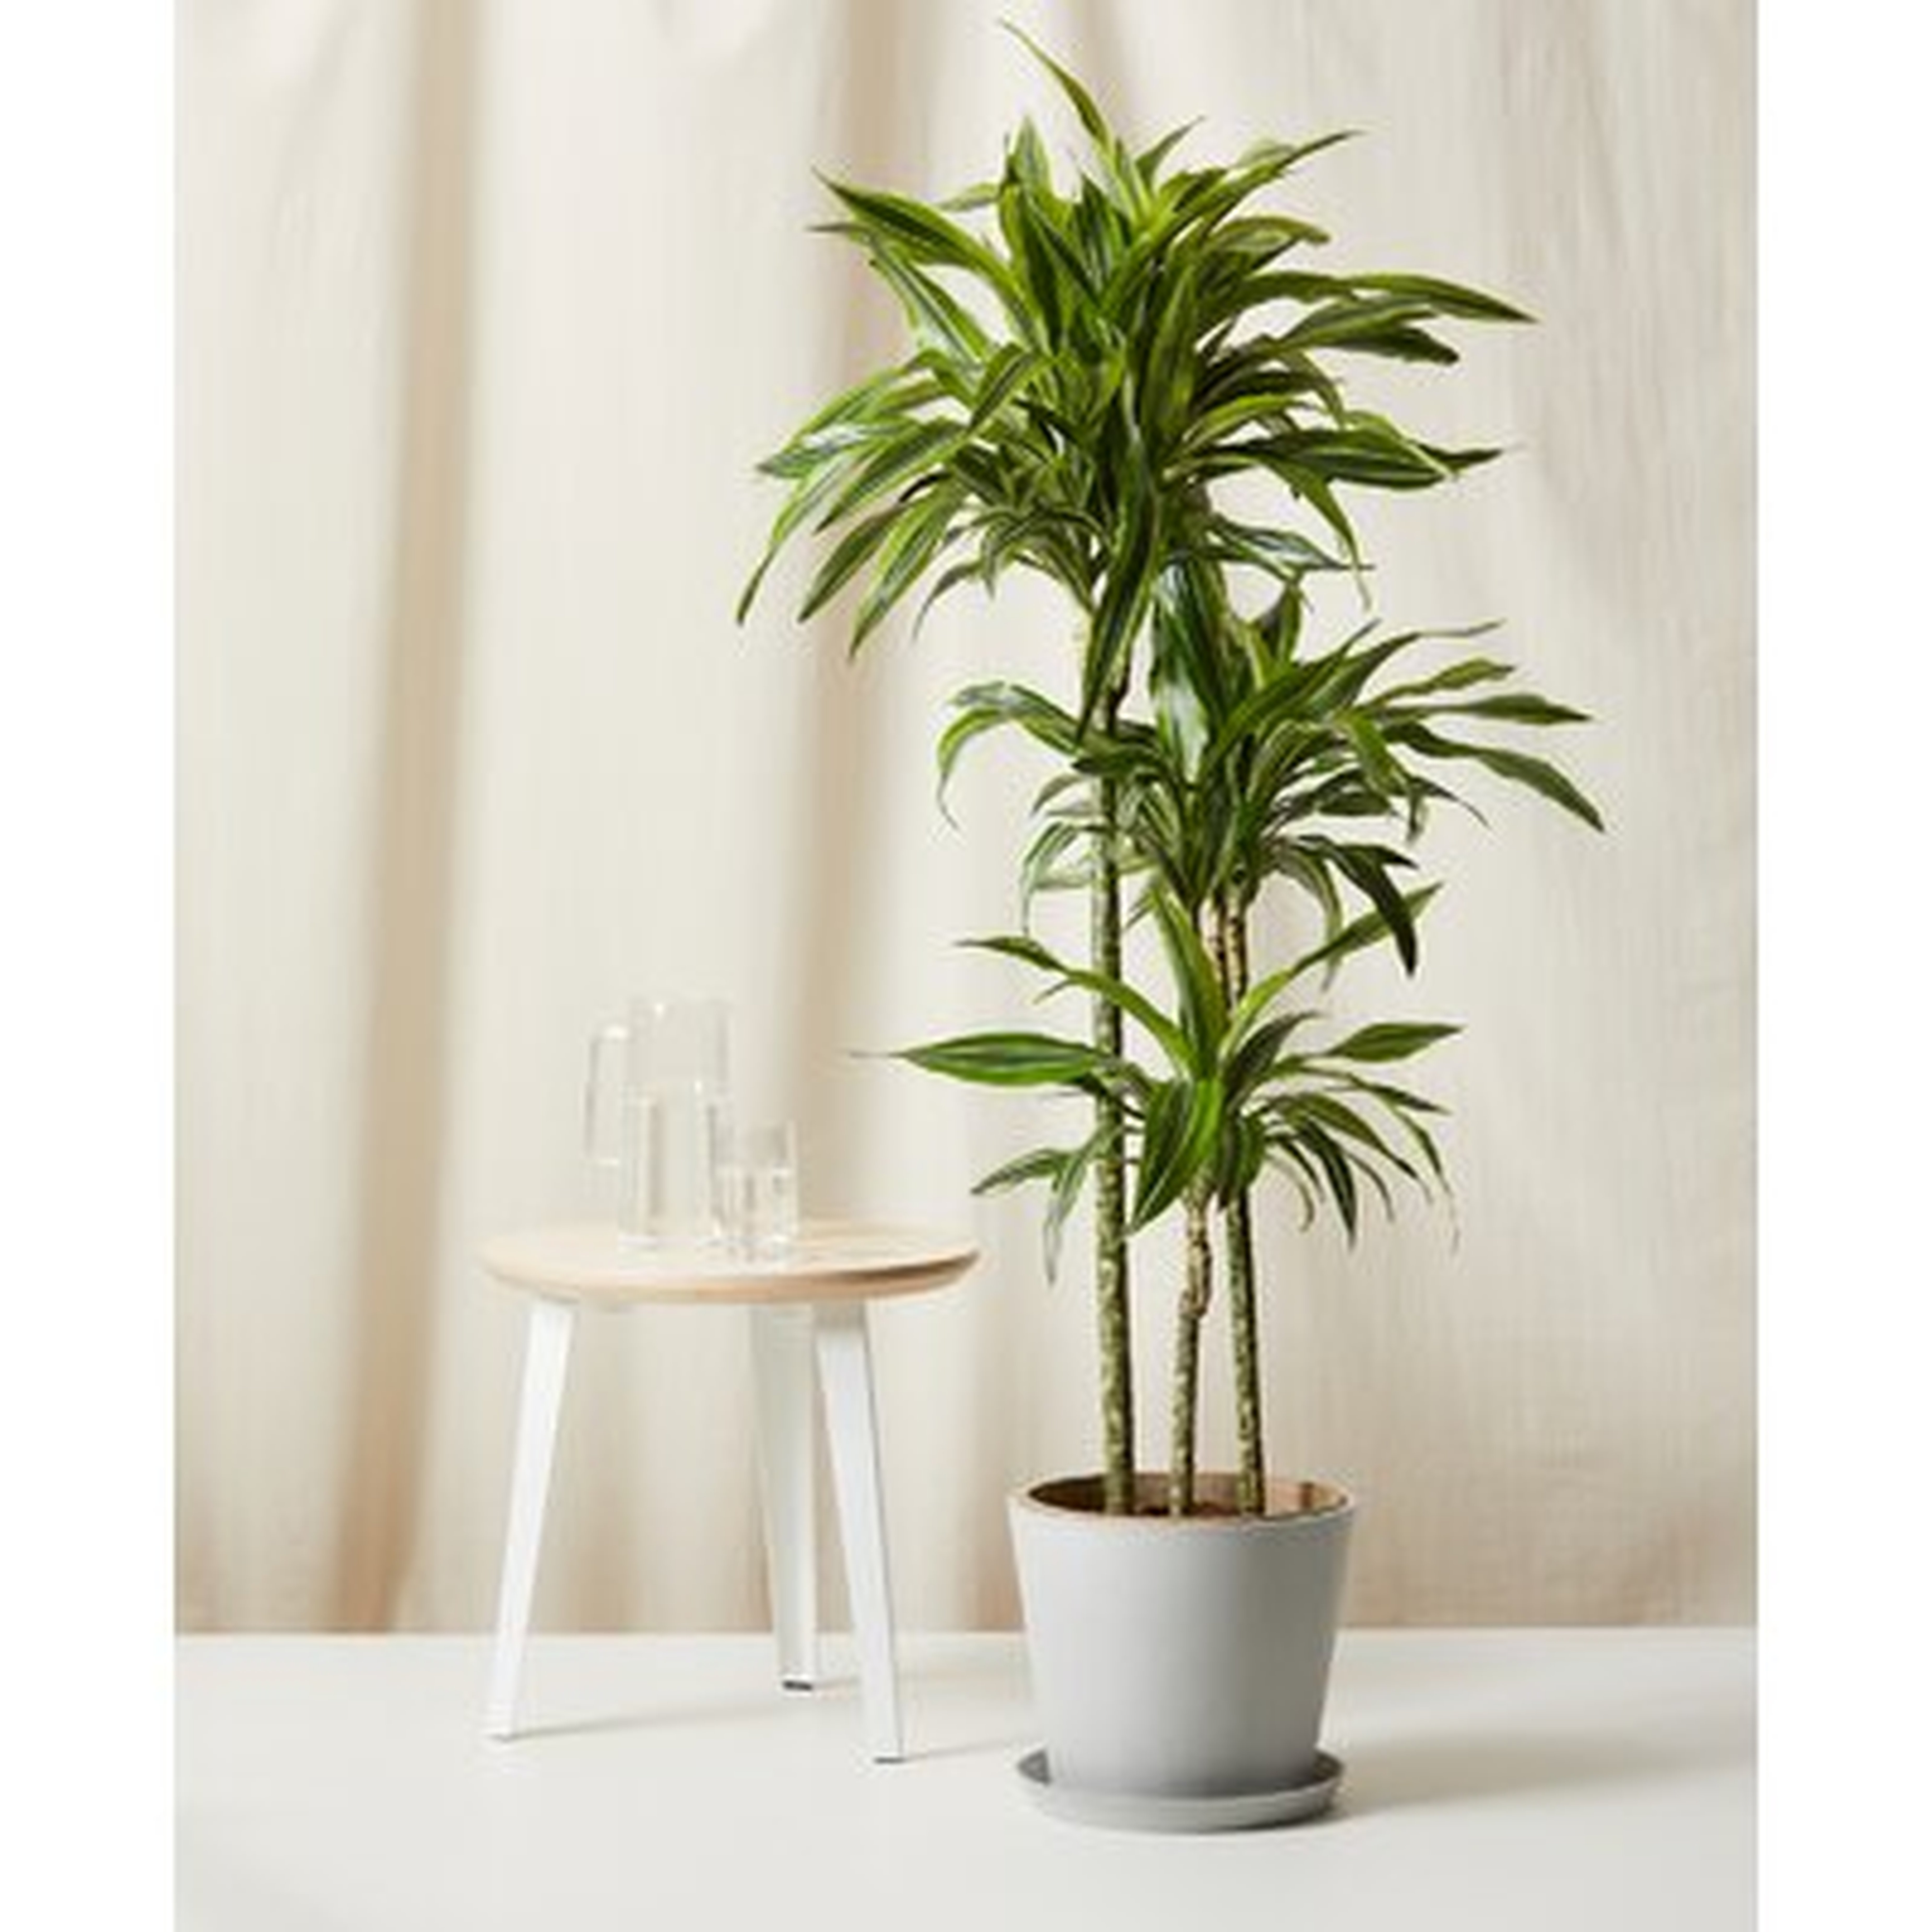 Bloomscape Dracaena Gold Star - 46"-52" Tall (Including Pot) Live Plant In Indigo Colored 12" Recycled Plastic Pot & Saucer - Wayfair